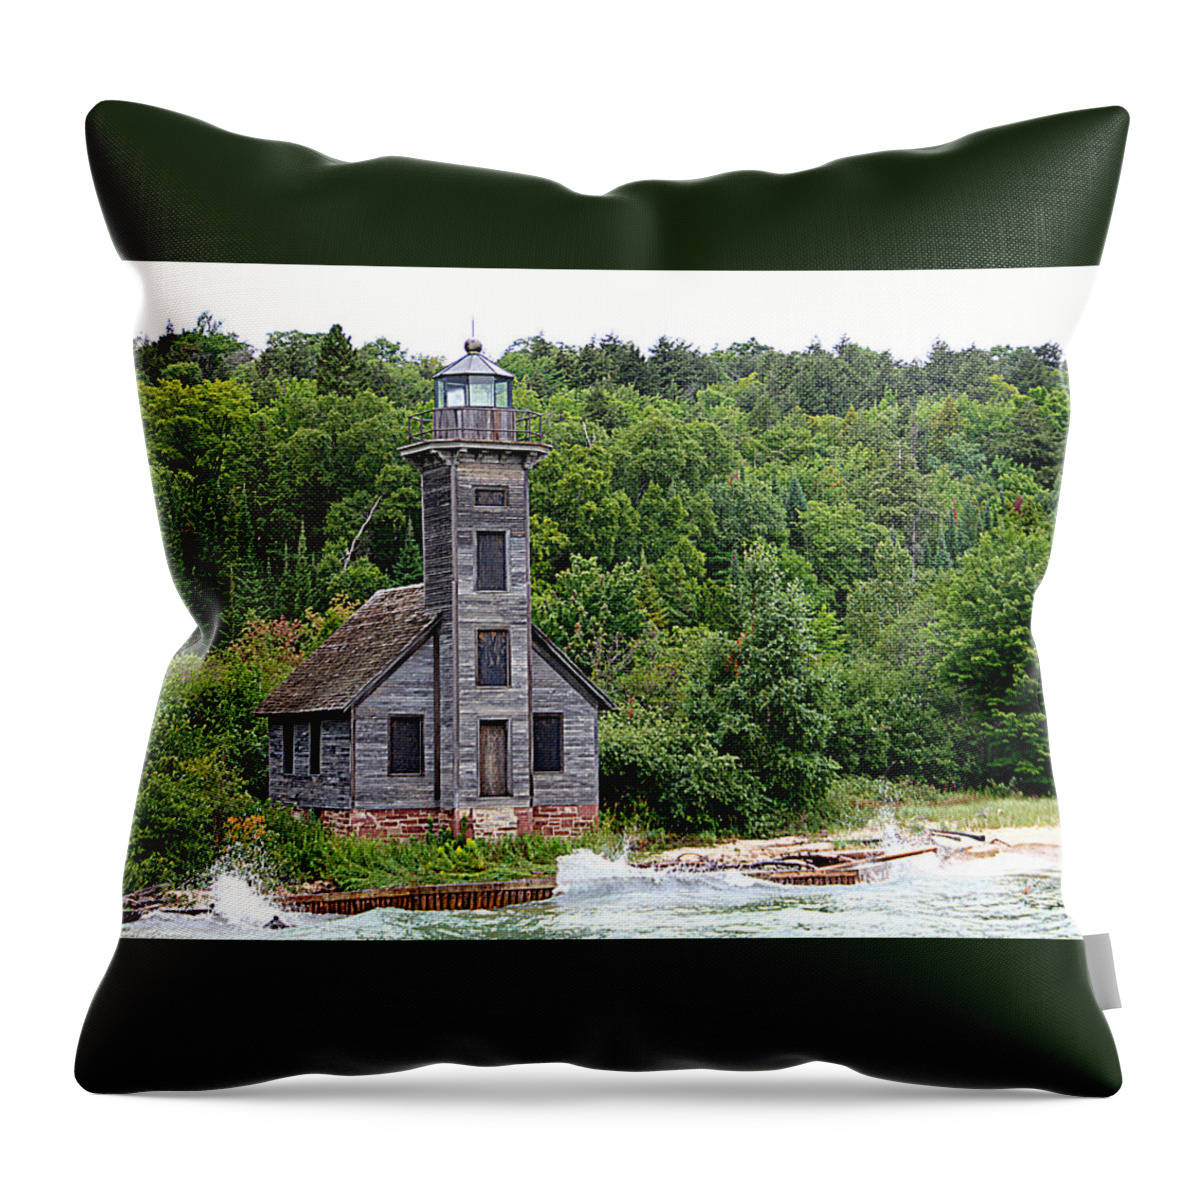 Grand Island East Channel Lighthouse Throw Pillow featuring the photograph Grand Island East Channel Lighthouse #6680 by Mark J Seefeldt